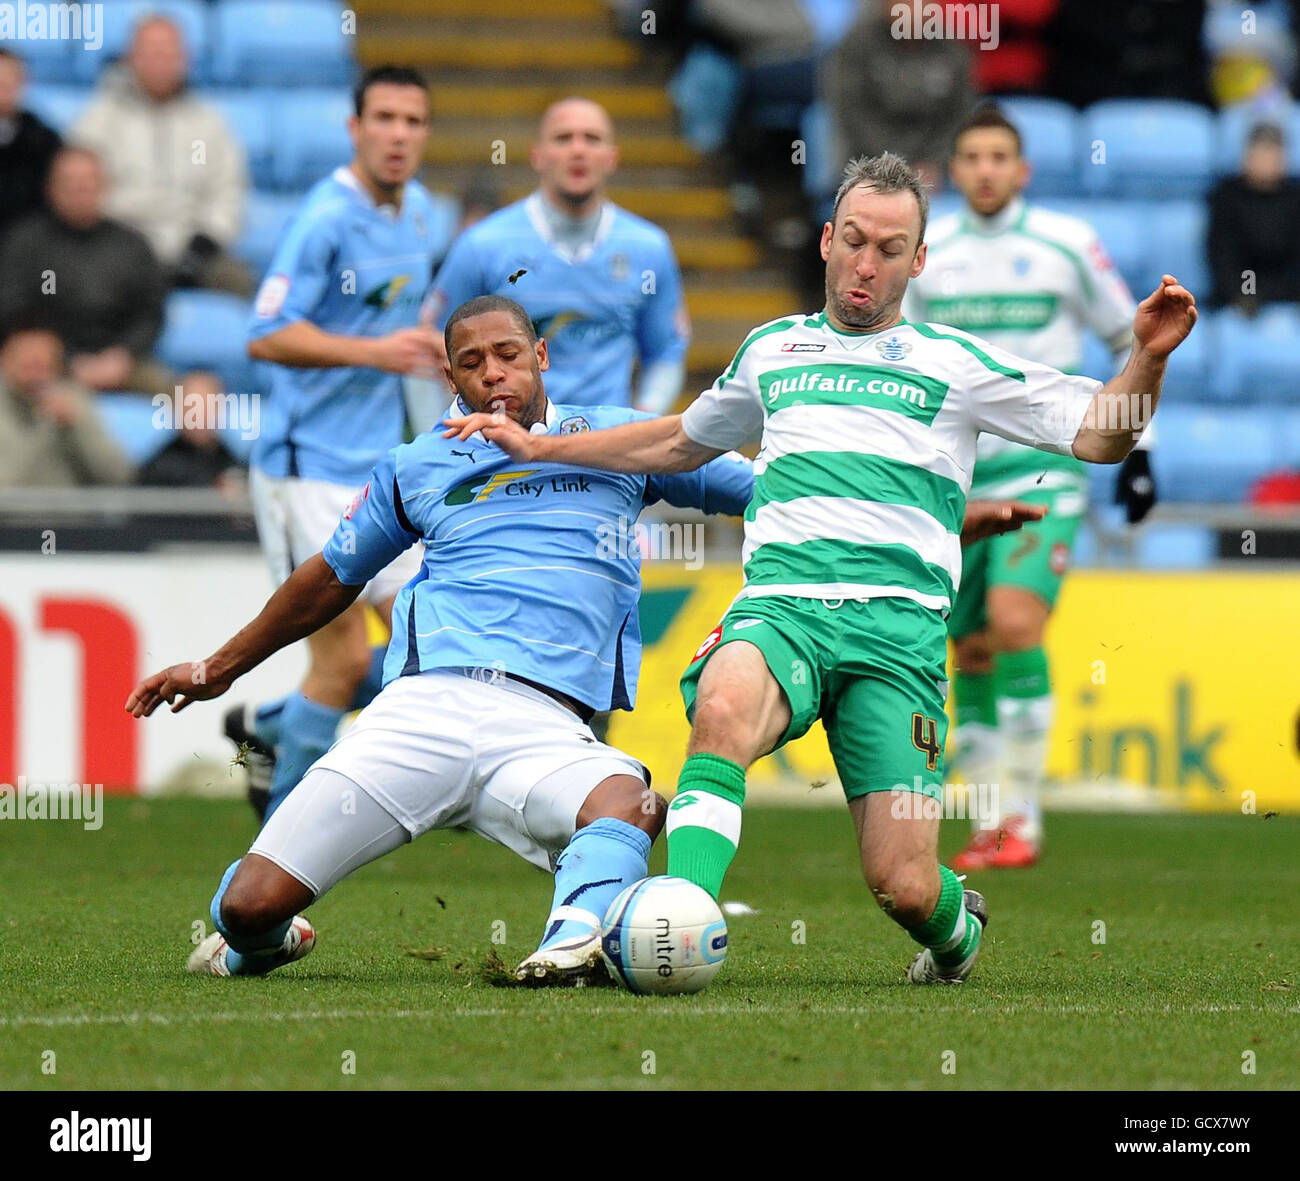 Coventry City's Clive Platt and Queens Park Rangers' Shaun Derry (right) battle for the ball during the npower Championship match at the Ricoh Arena, Coventry. Stock Photo